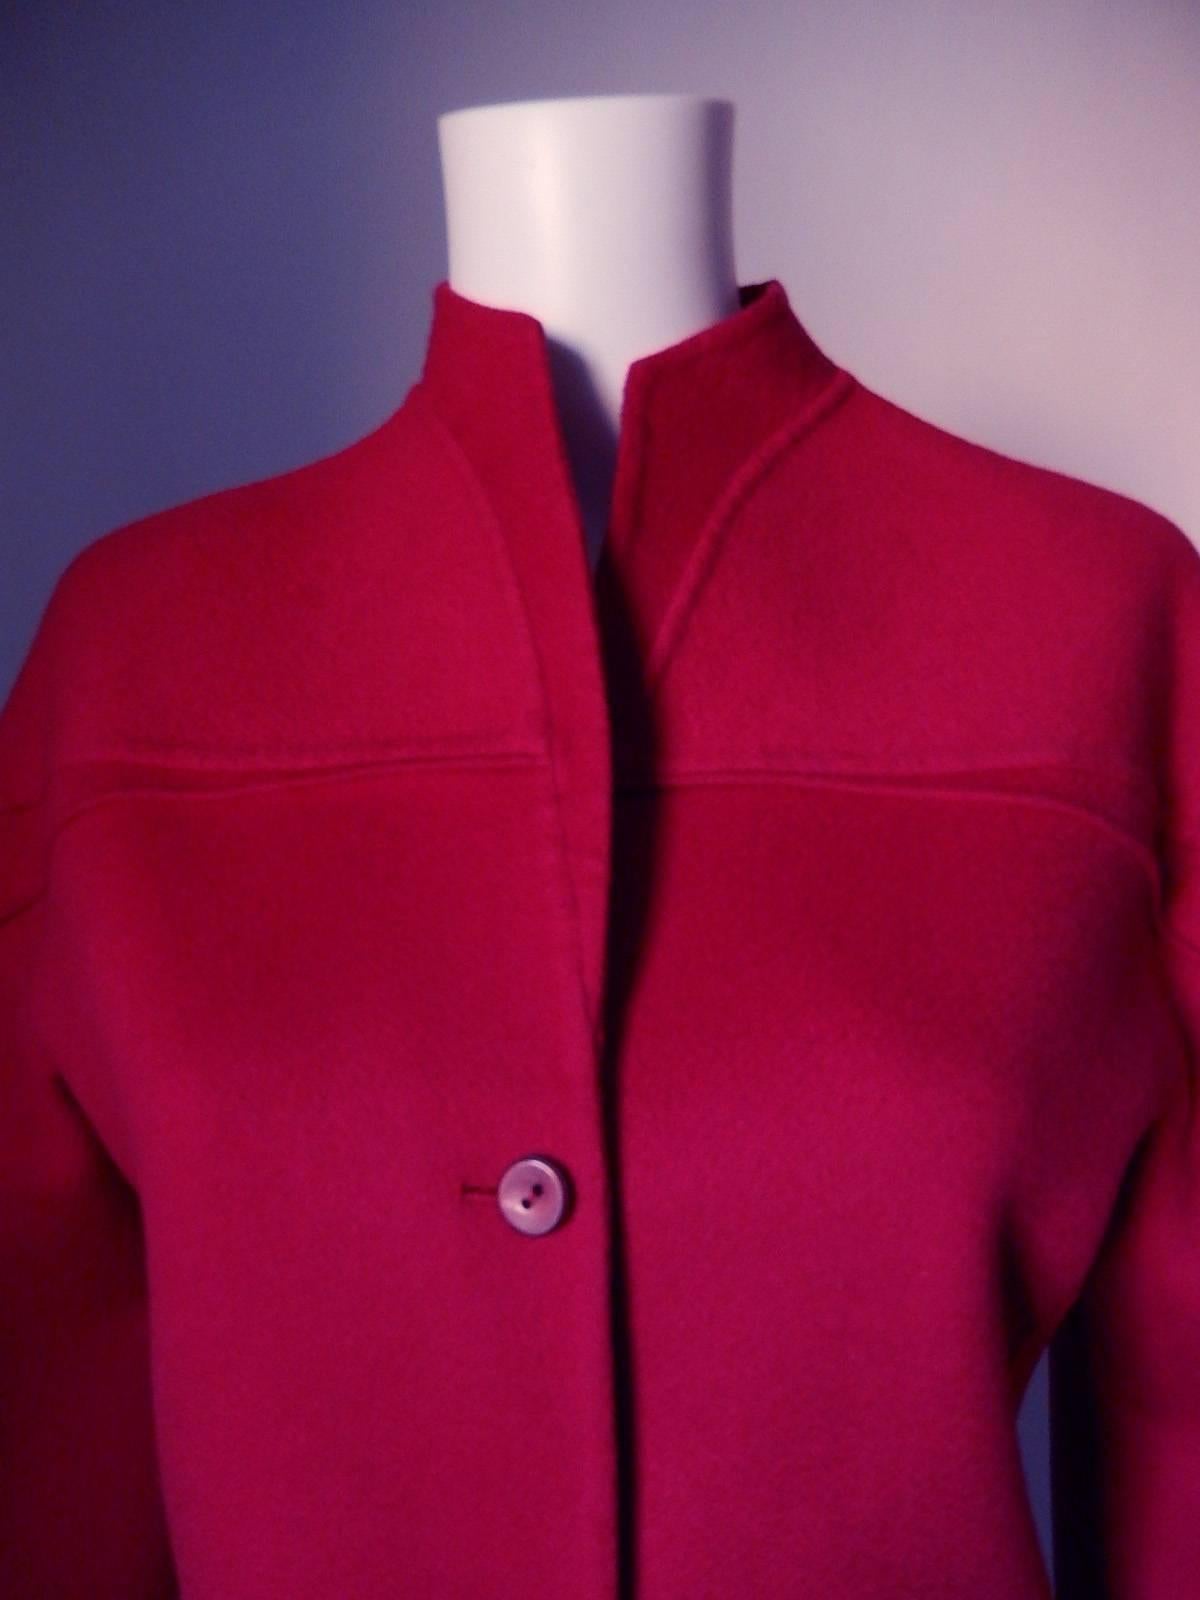 Chado Ralph Rucci 100% Cashmere Jacket
Color is  red/raspberry
Three dimensional seaming details
Sloped shoulder line

Bust:  37